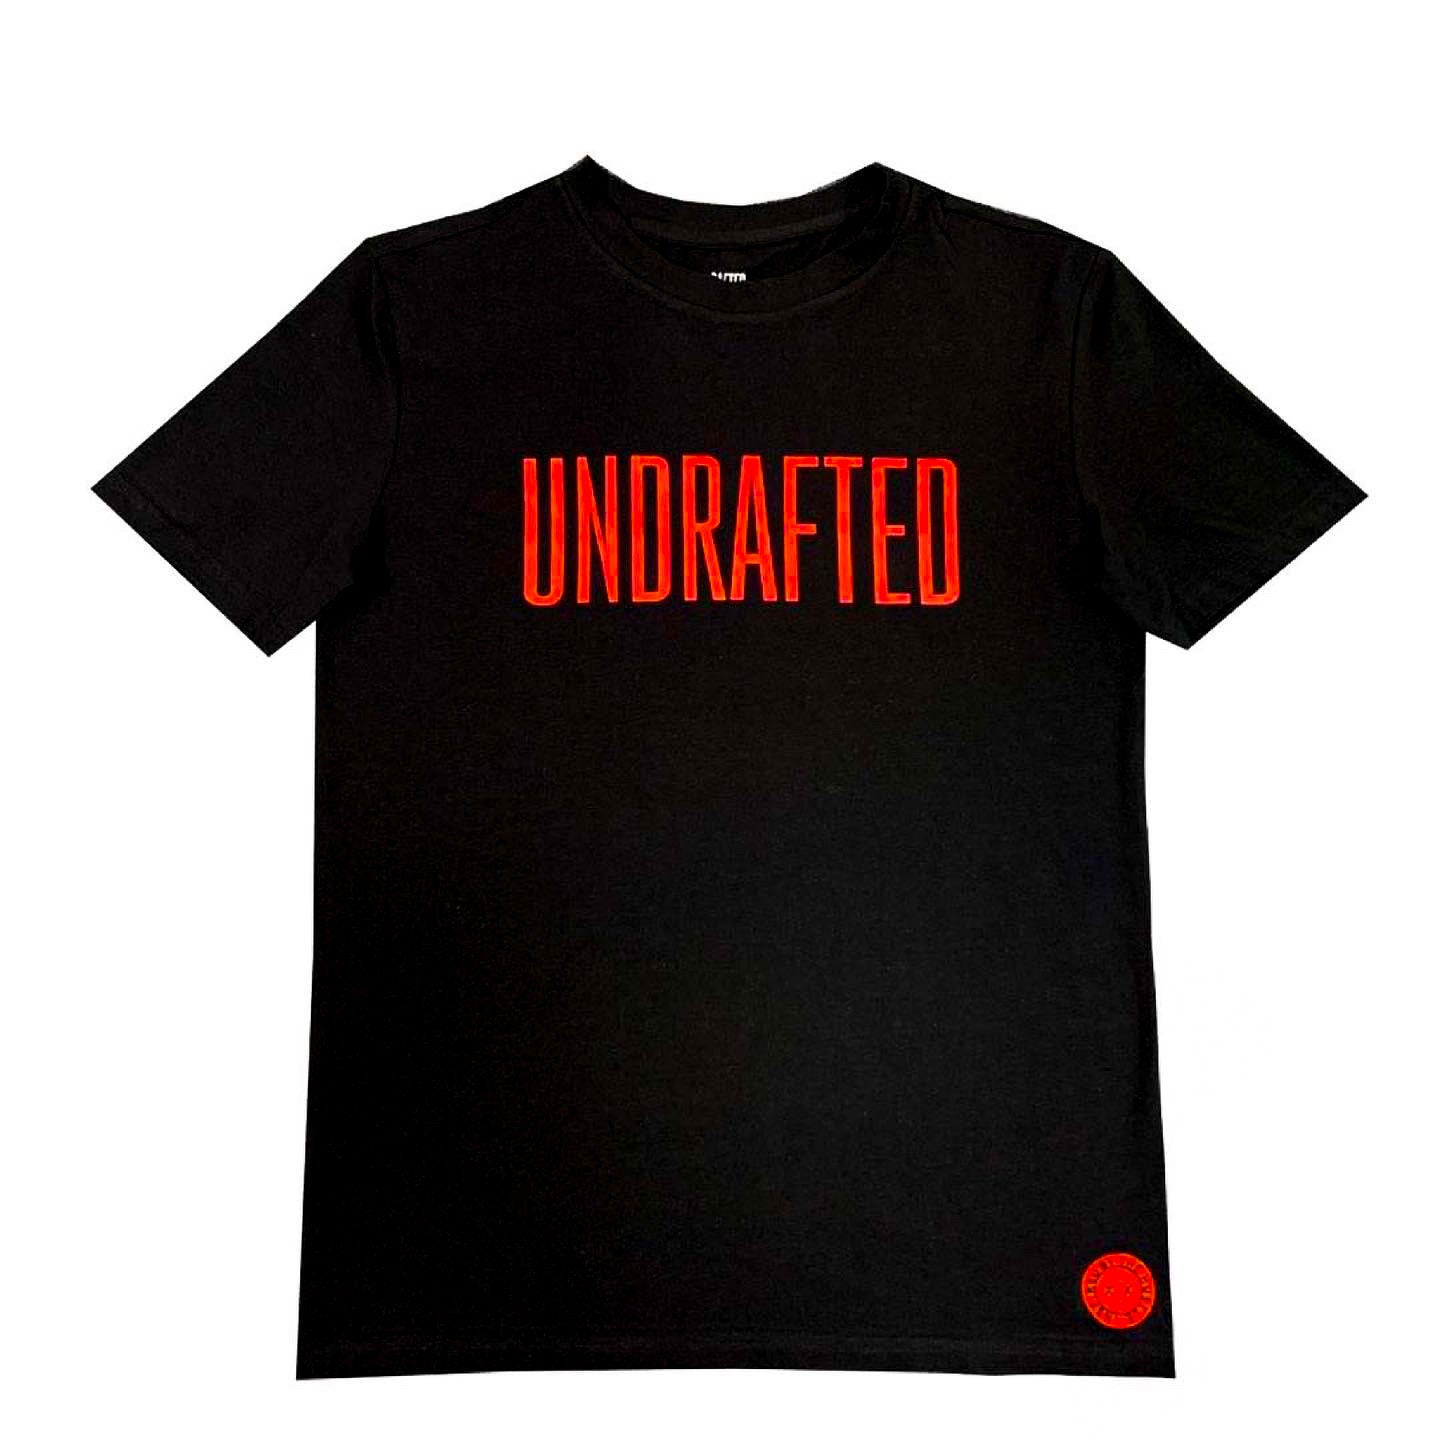 Undrafted T-Shirt Black/Red